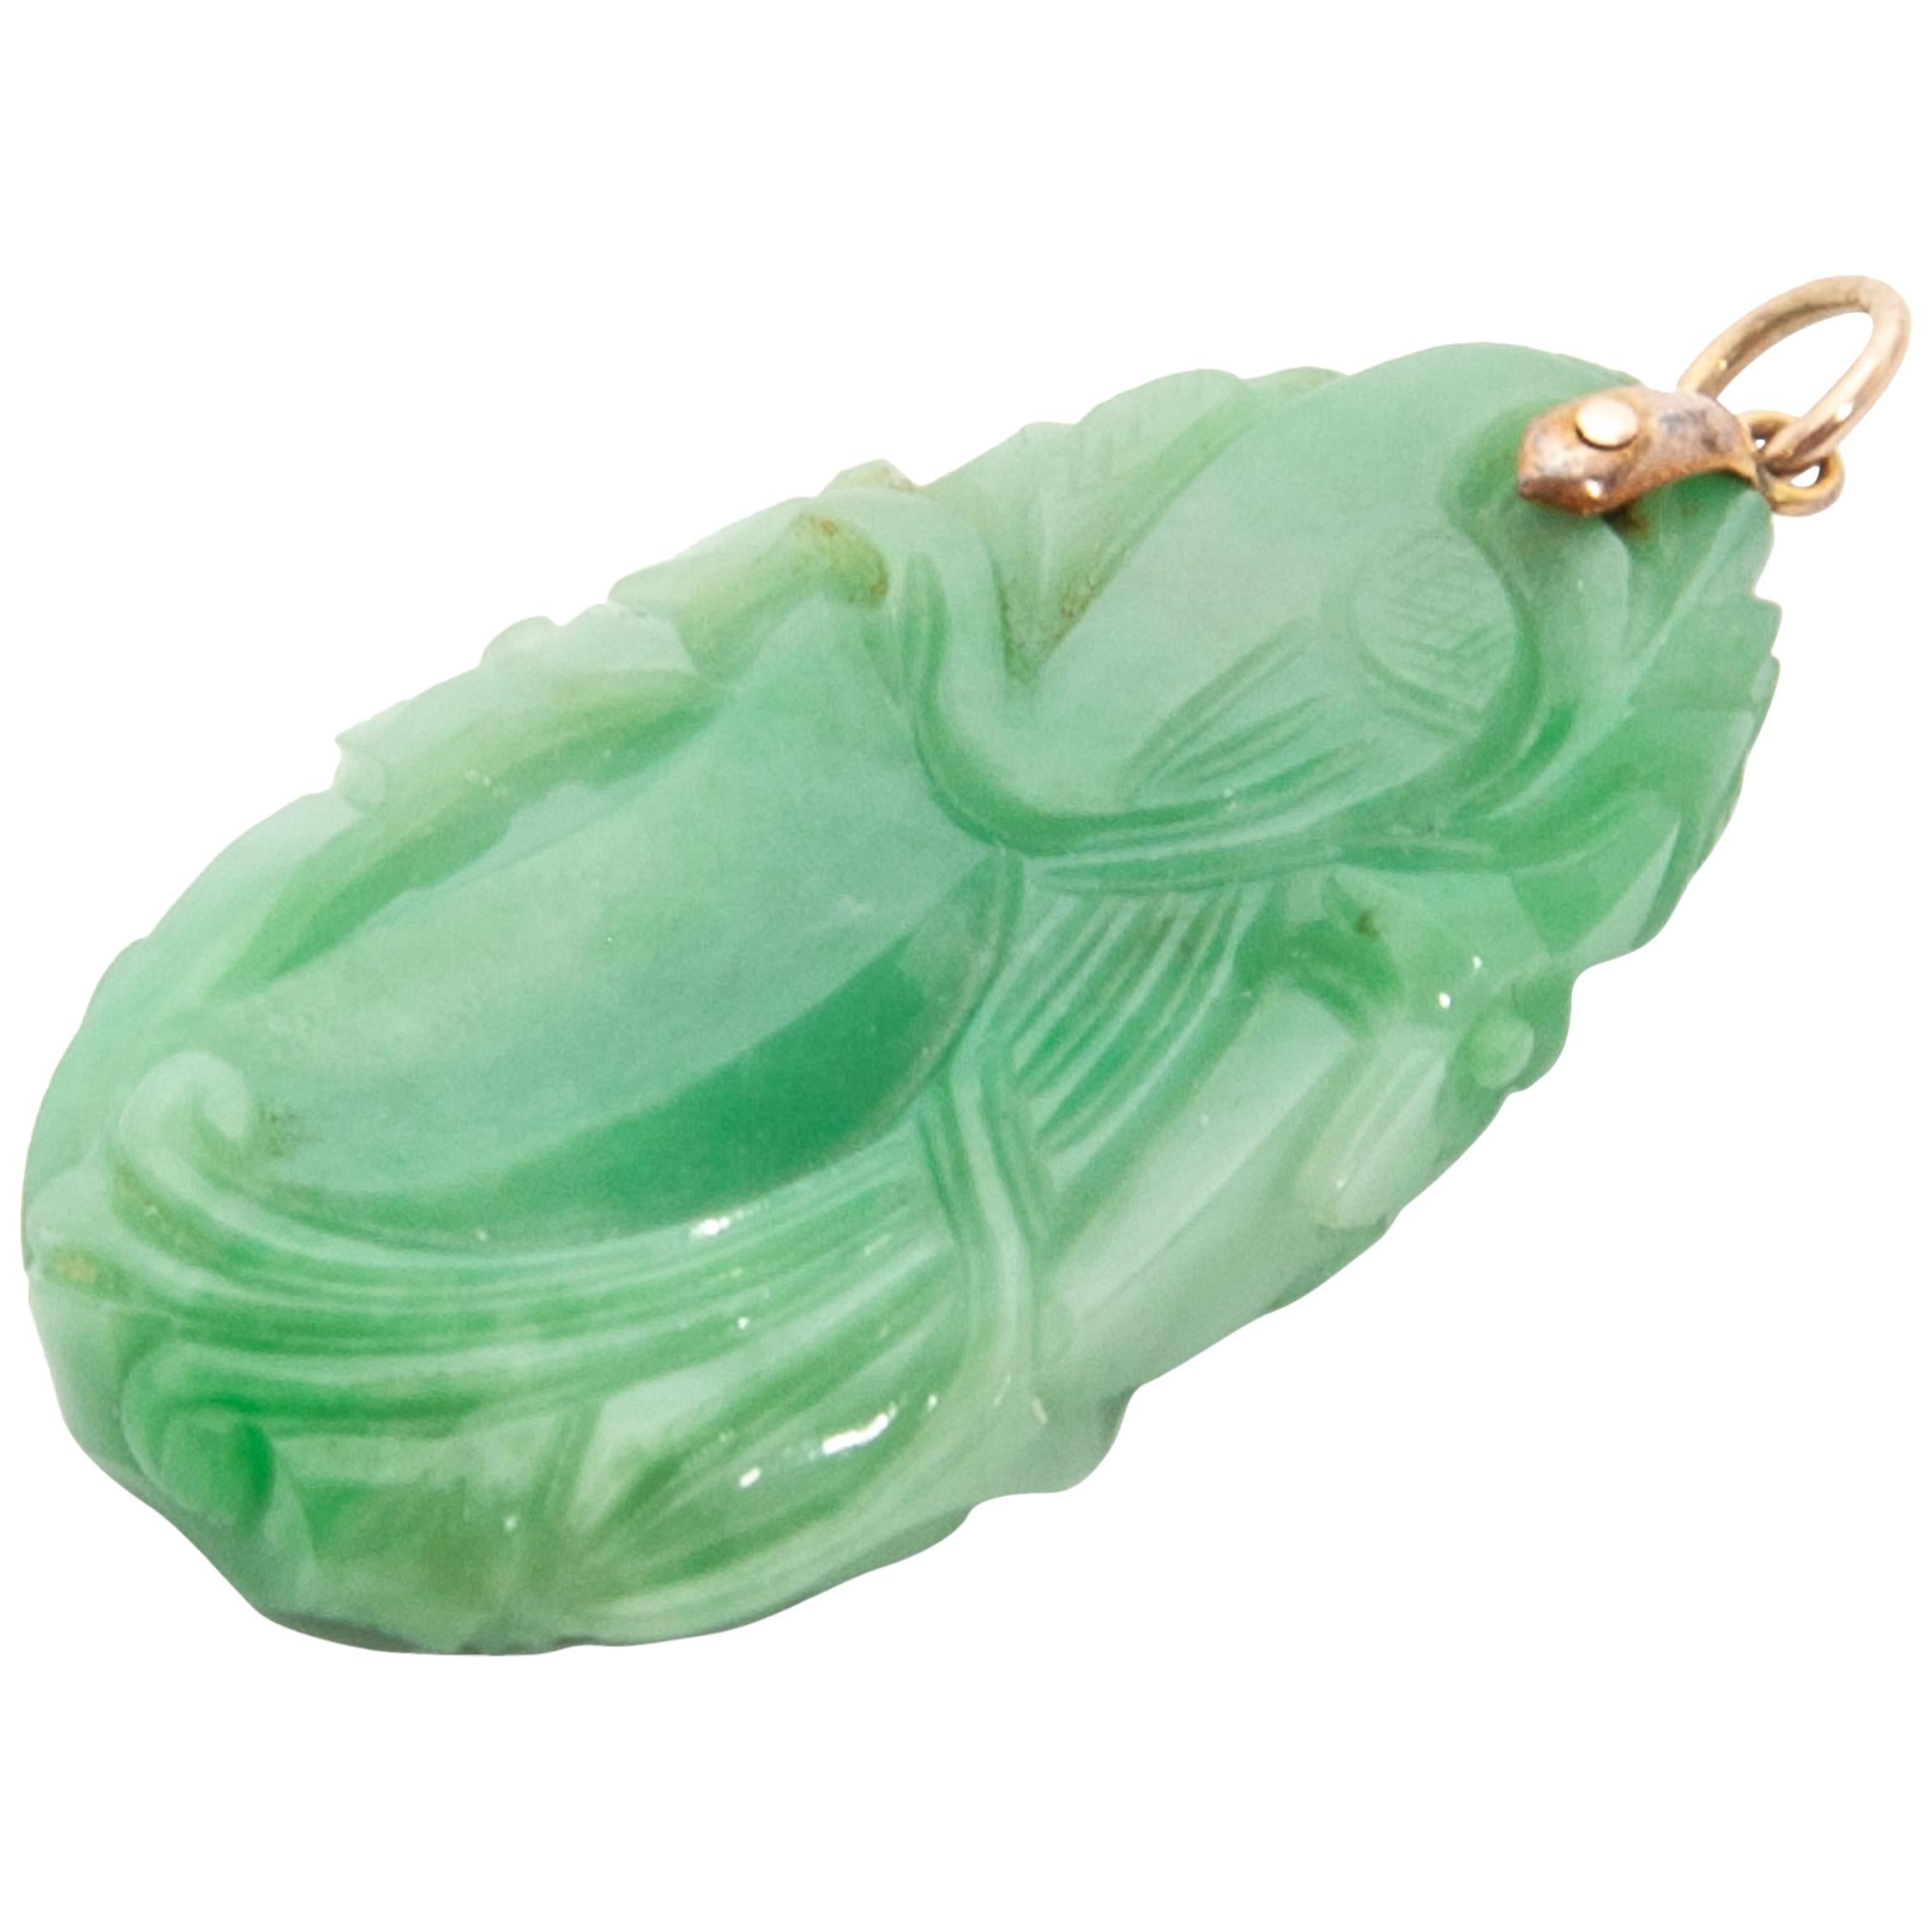 Fish and Floral Carved Green Jade Pendant